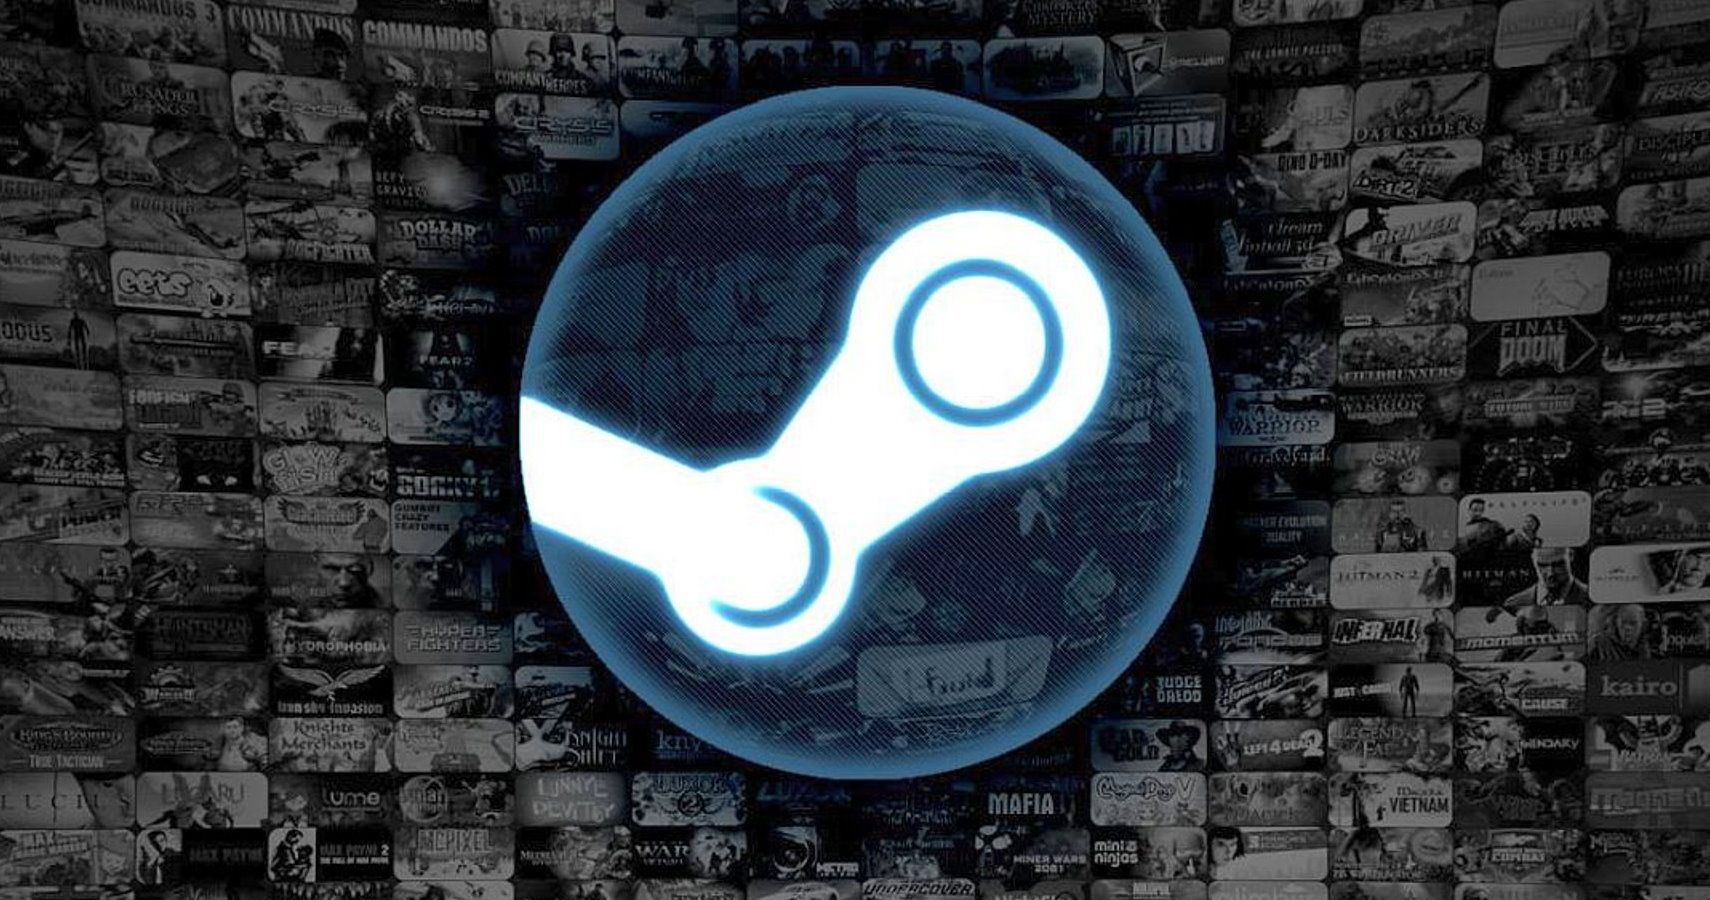 European Commission fines Valve for Steam geo-blocking - Industry - News 